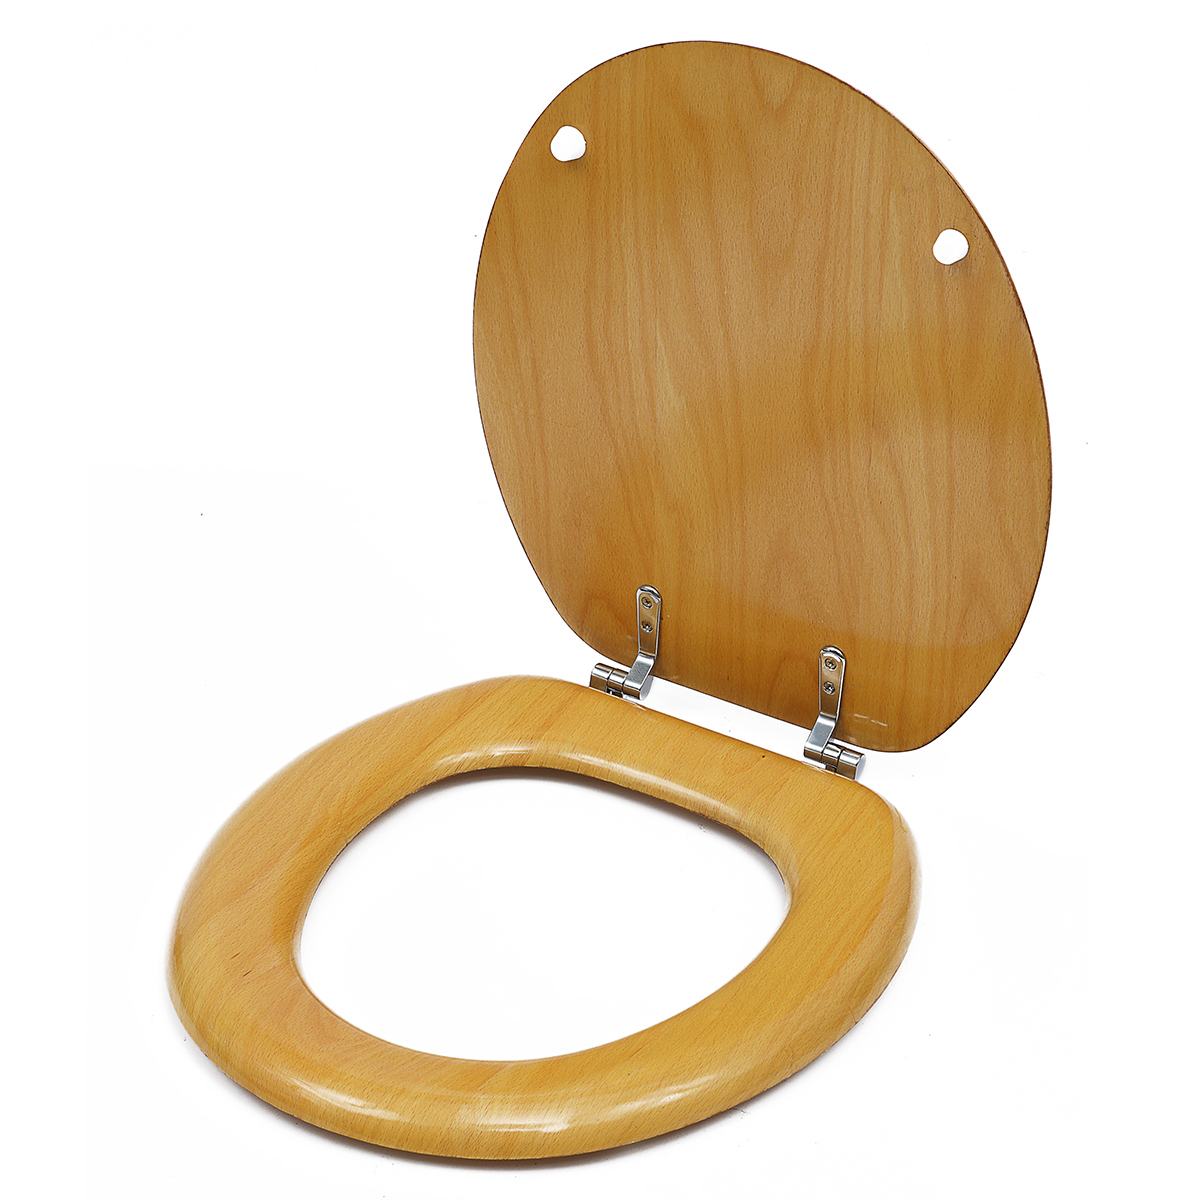 Other Hardware Accessories Toilet Seat Covers Round Wood Durable Lift